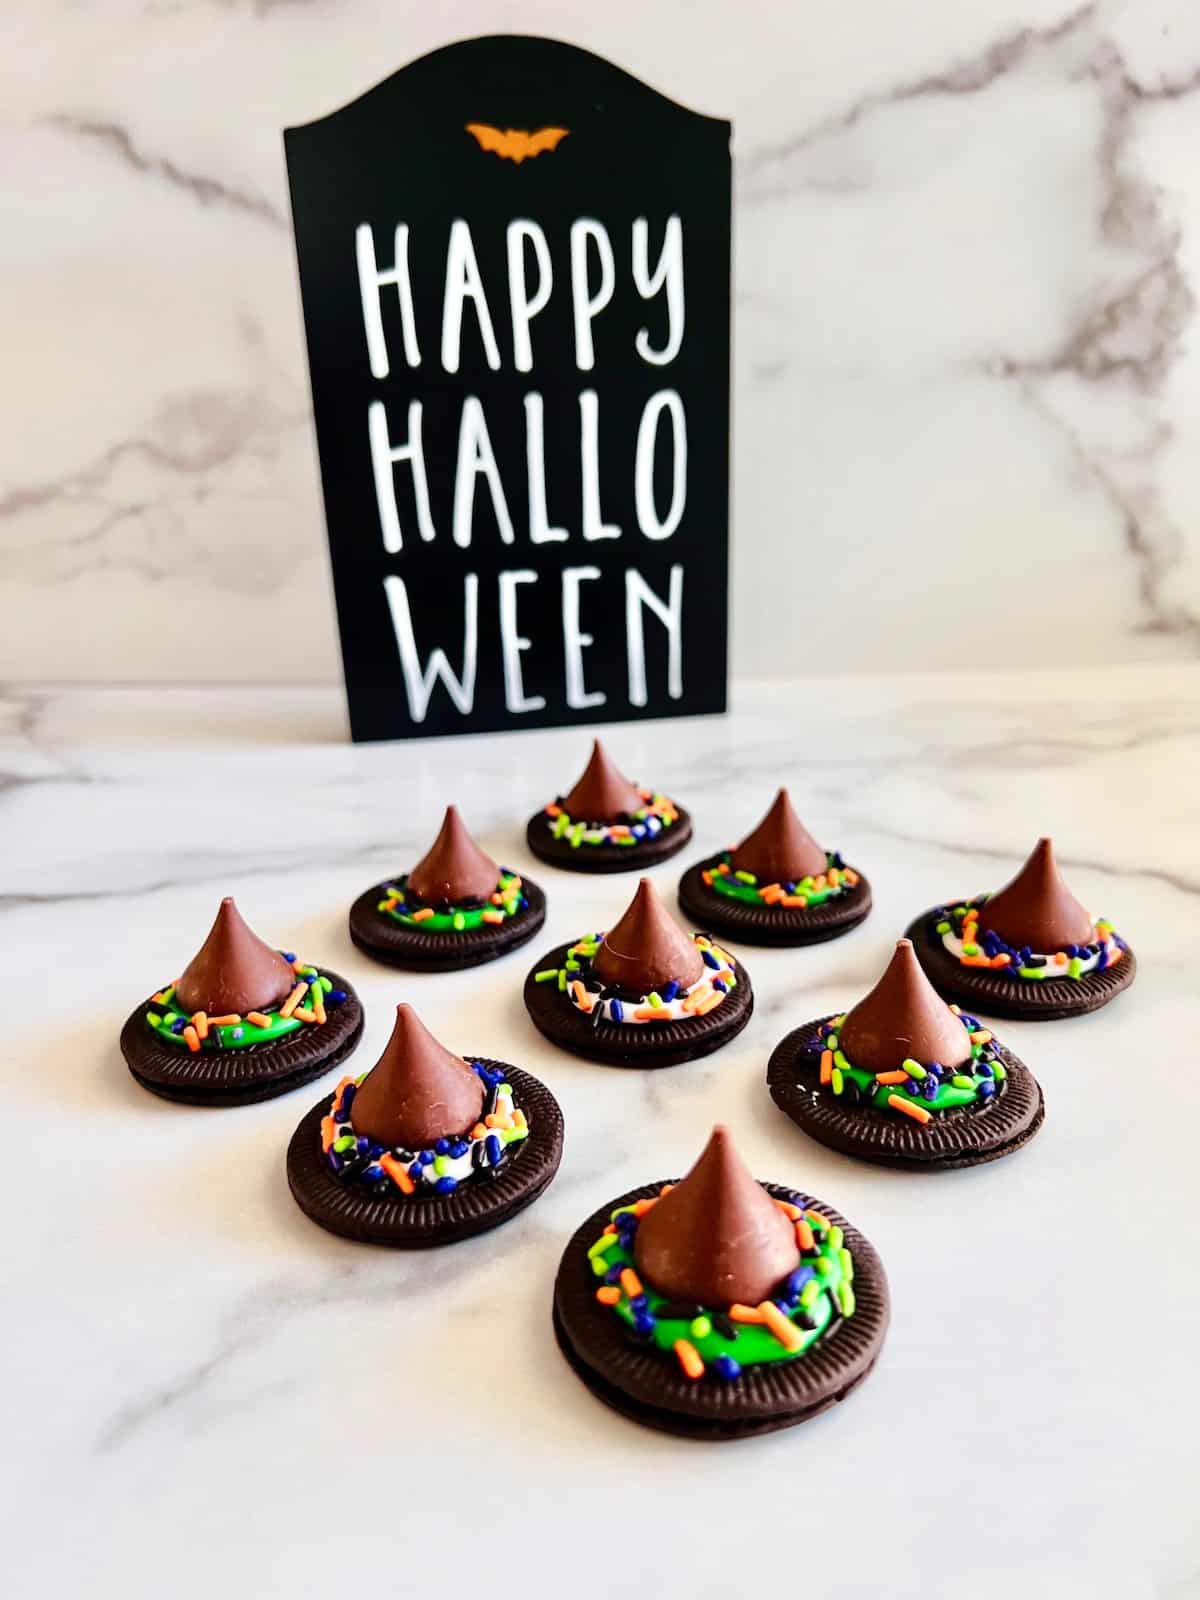 Witch Hat Cookies On a counter with happy halloween sign.